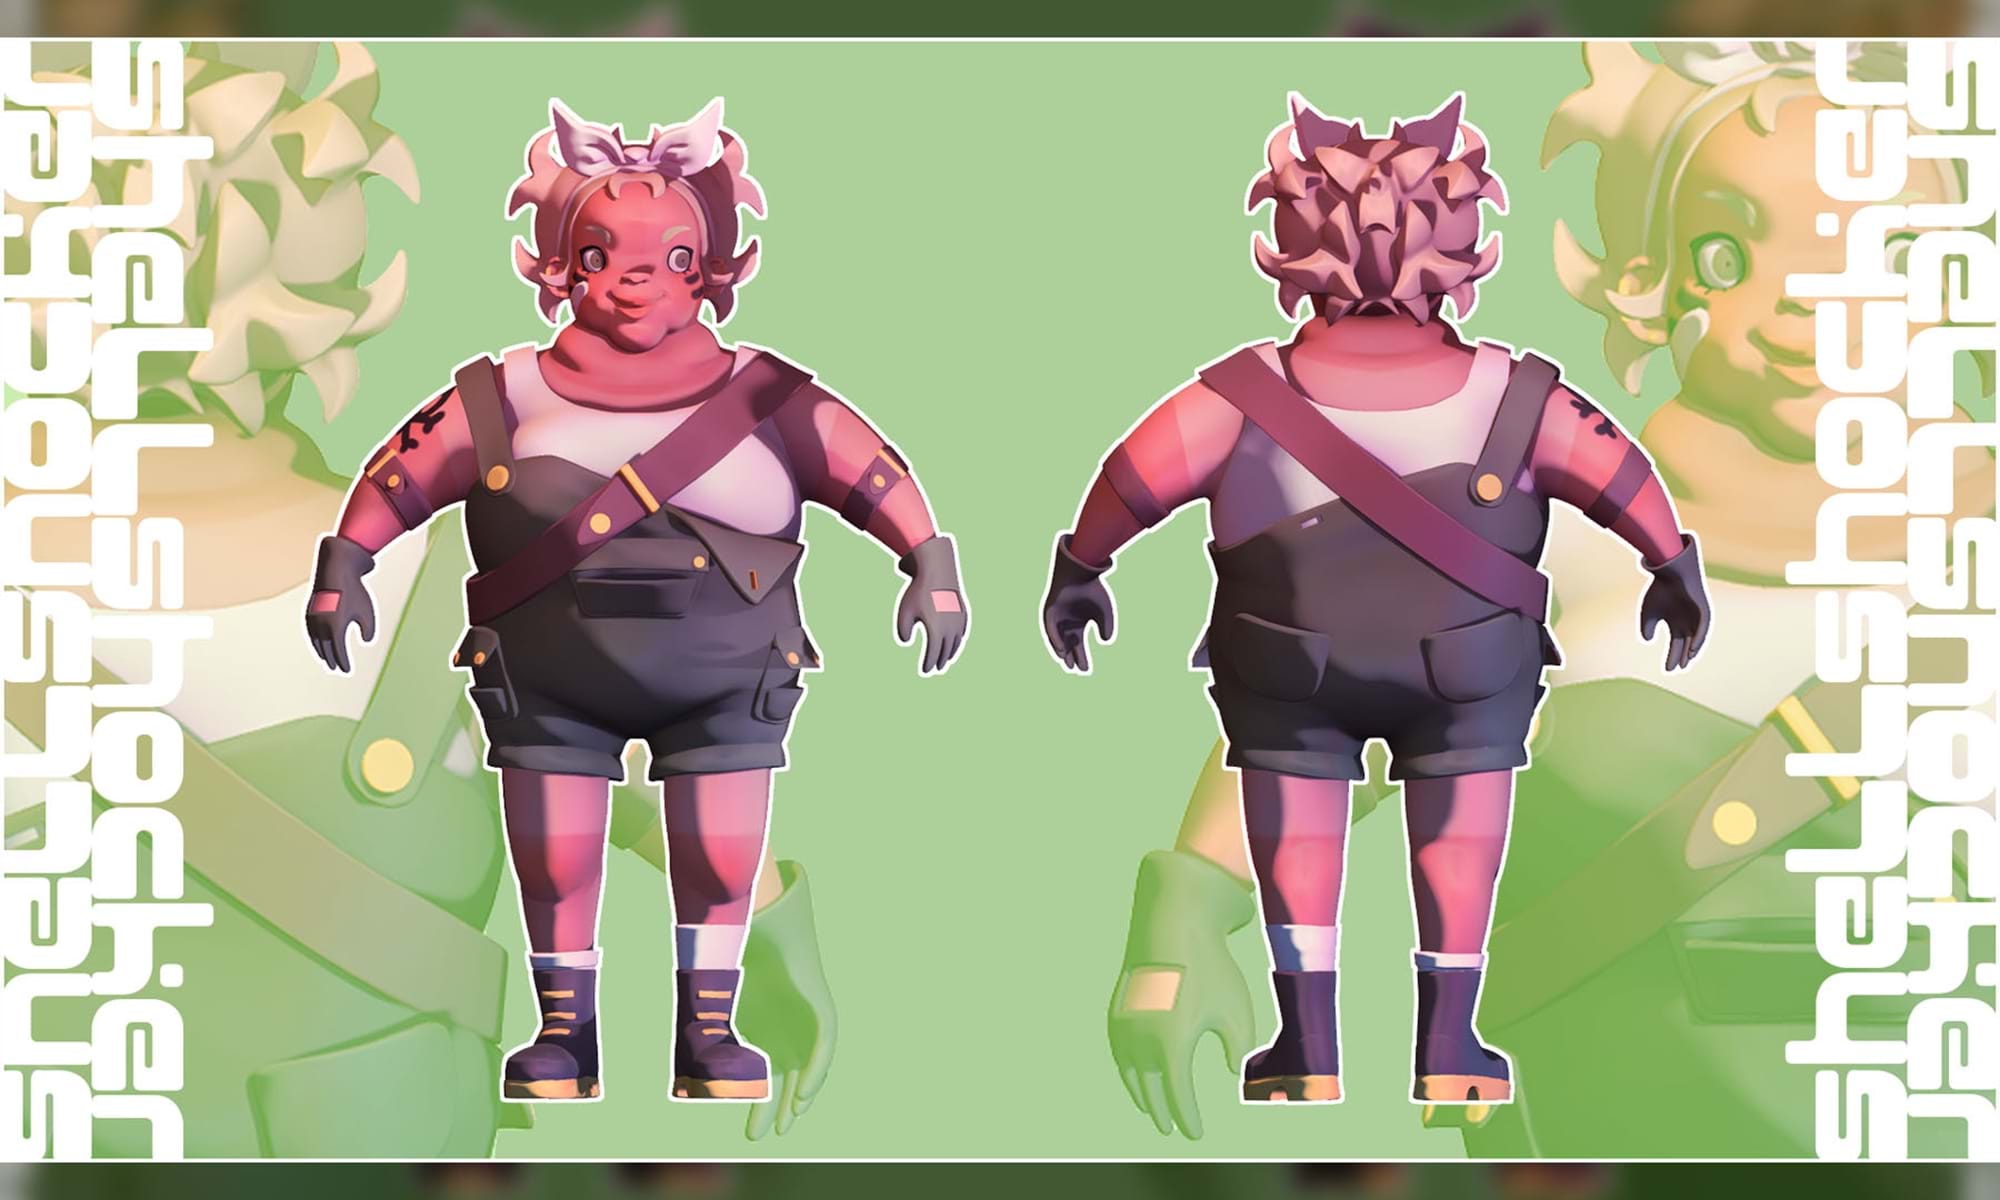 “ATHLETICA: A Study on Character Design and its Importance in Female Representation in Games” is a 2021 Digital Graduate Show project by Jena Summer Reid, a Computer Arts student at Abertay University.      